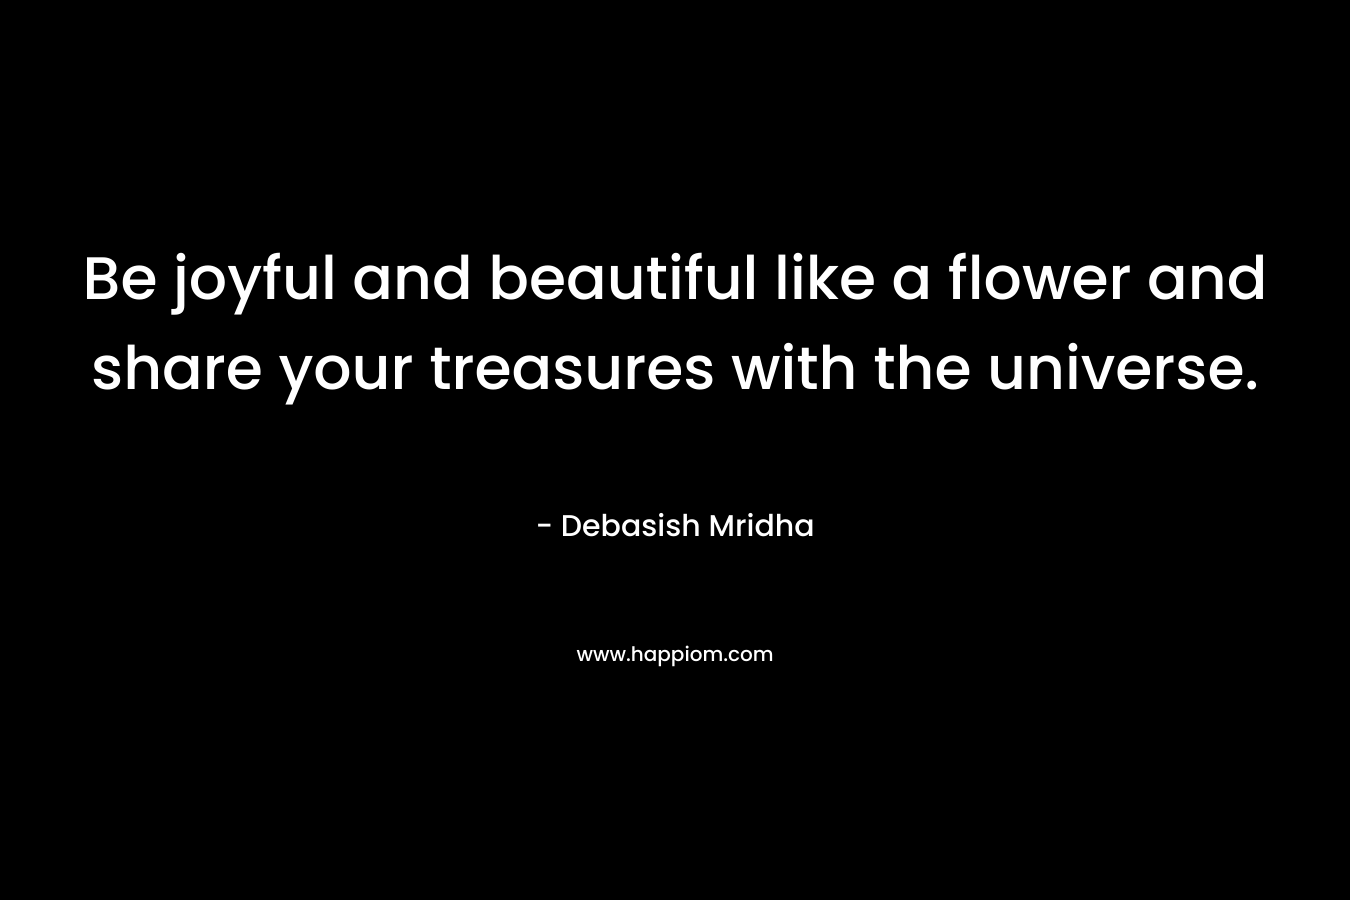 Be joyful and beautiful like a flower and share your treasures with the universe.